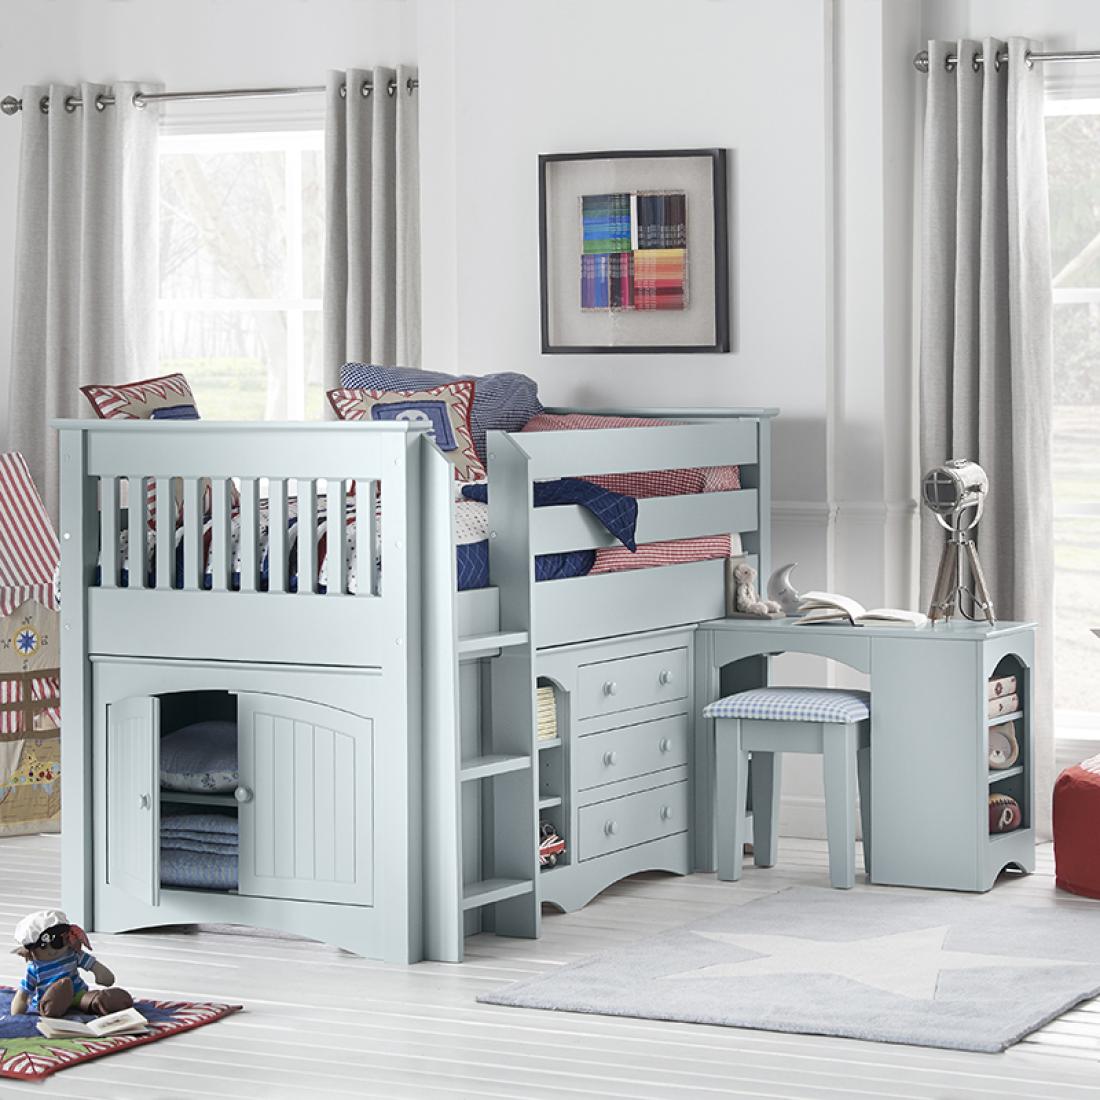 bunk bed with slide for girls